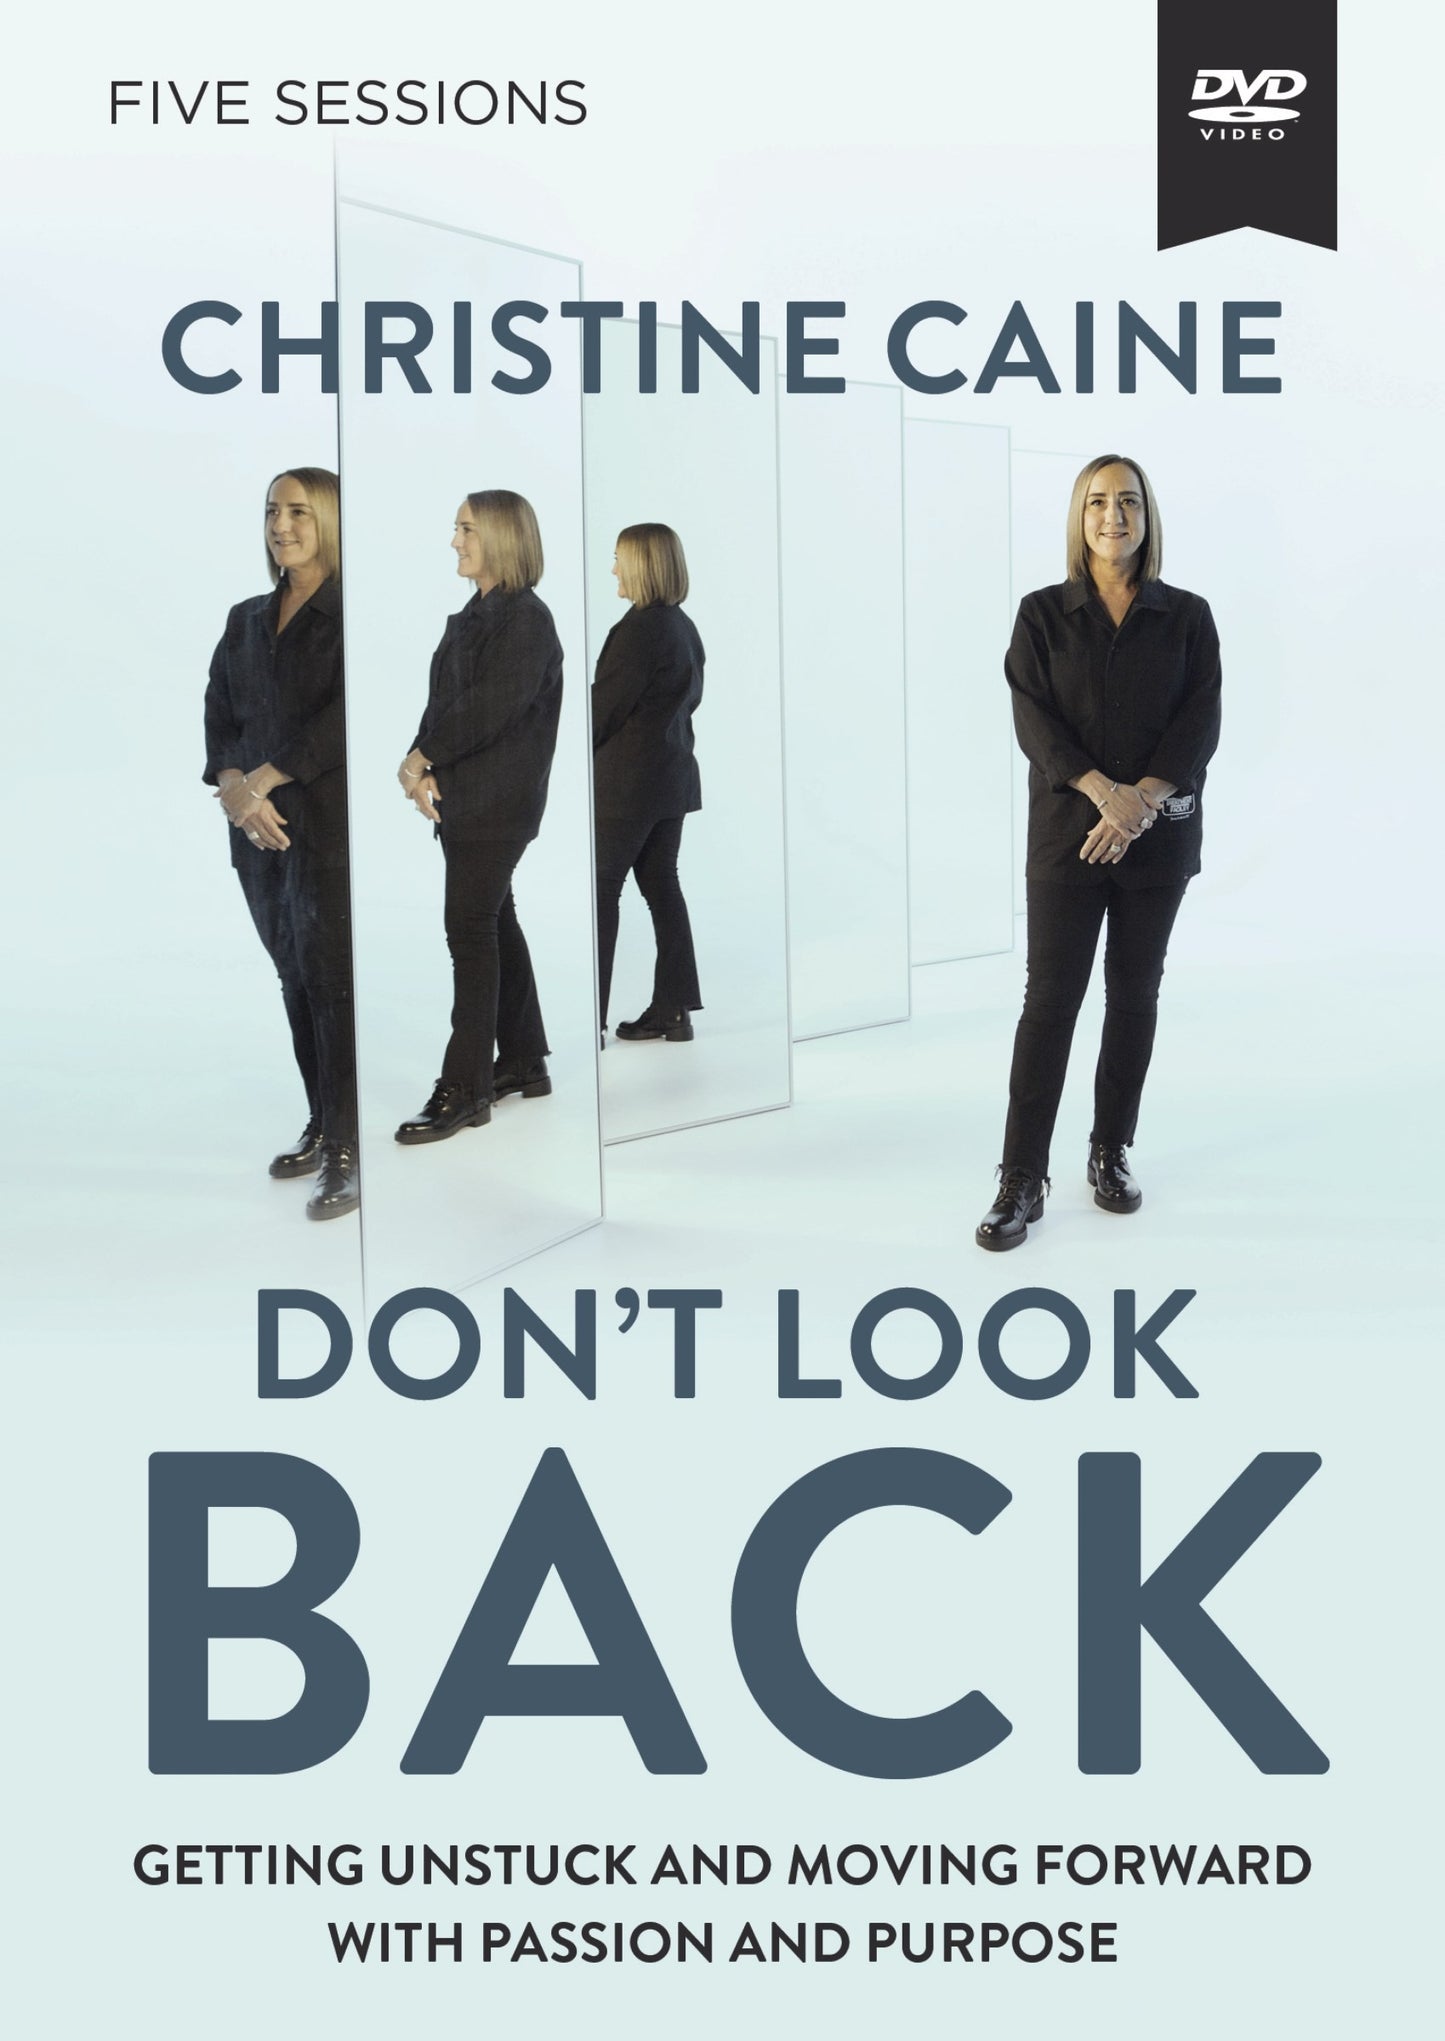 DVD-Don't Look Back Video Study